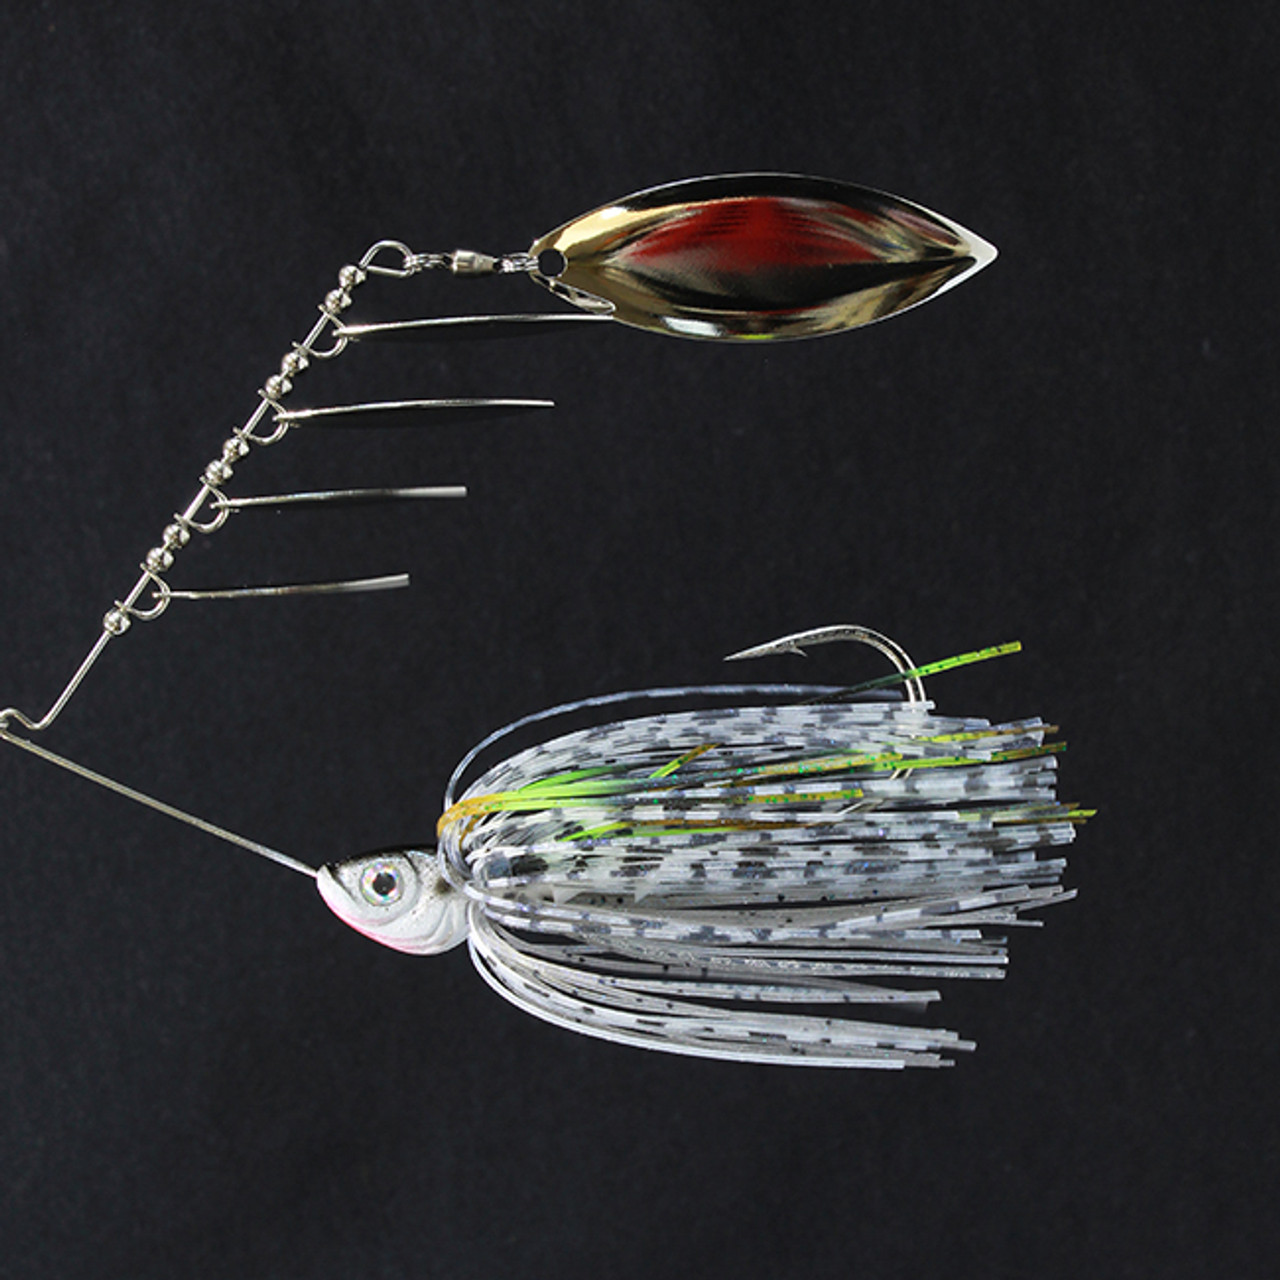 ScatterShad™ FH-5 Spinnerbait